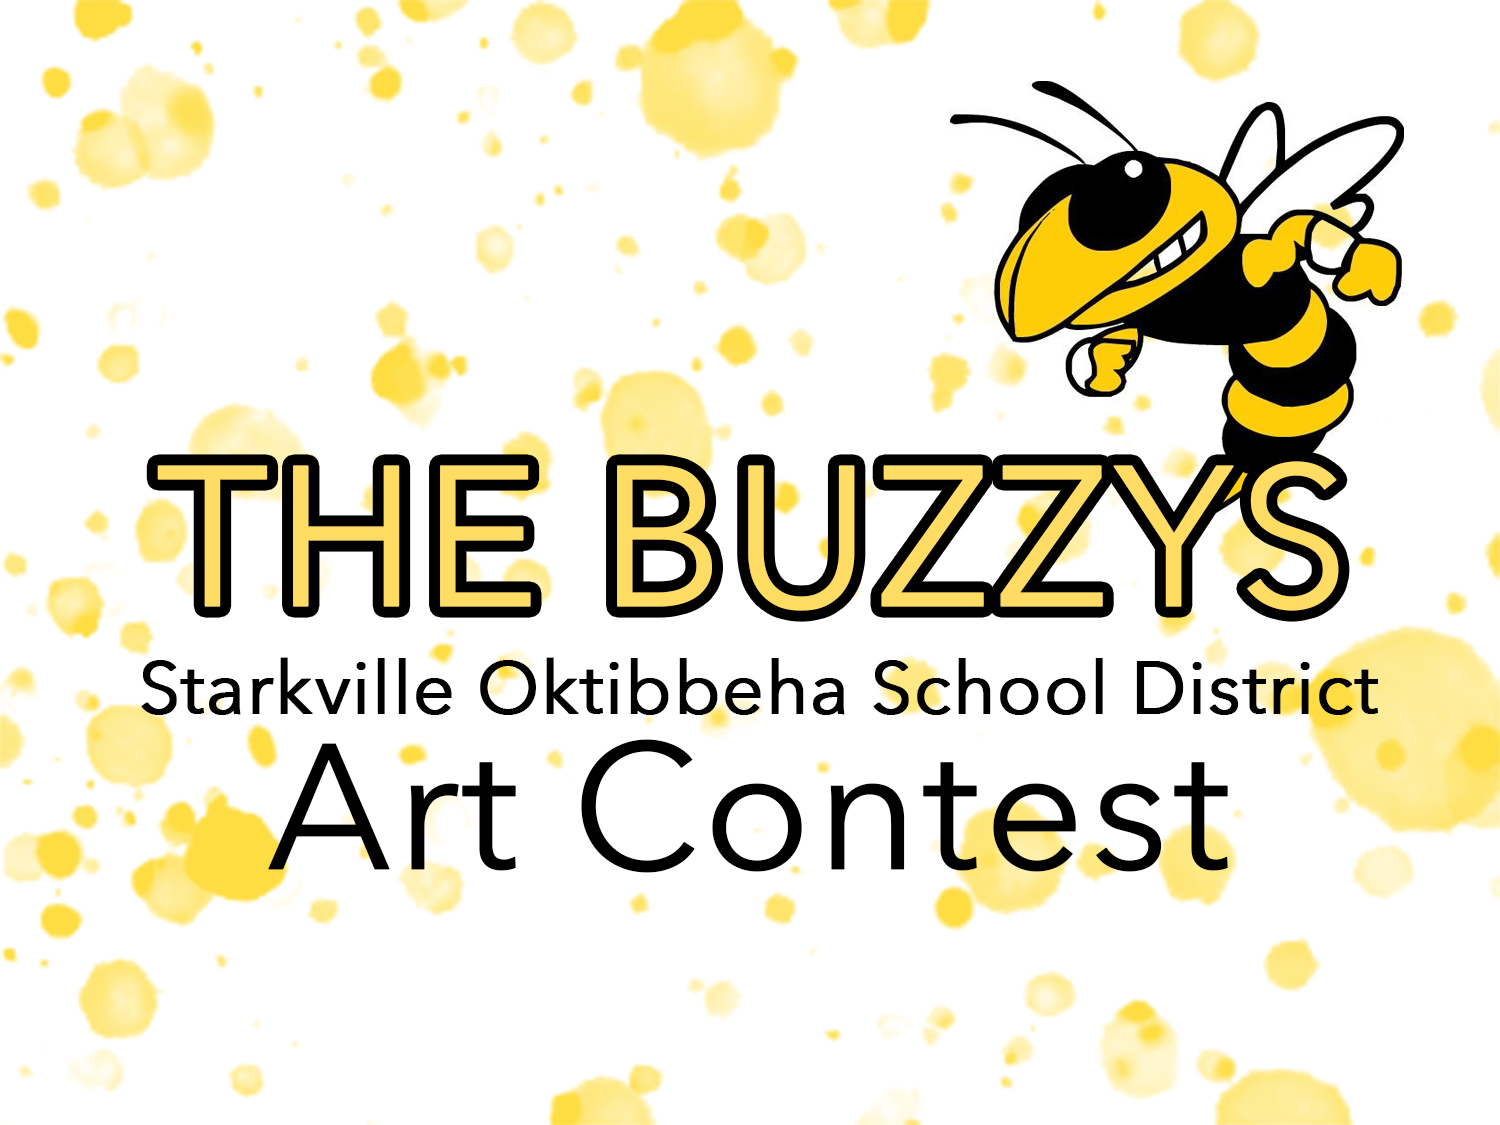 Black and gold words - the buzzys starkville oktibbeha school district art contest over yellow paint drops. Black and yellow yellow-jacket mascot in upper right.